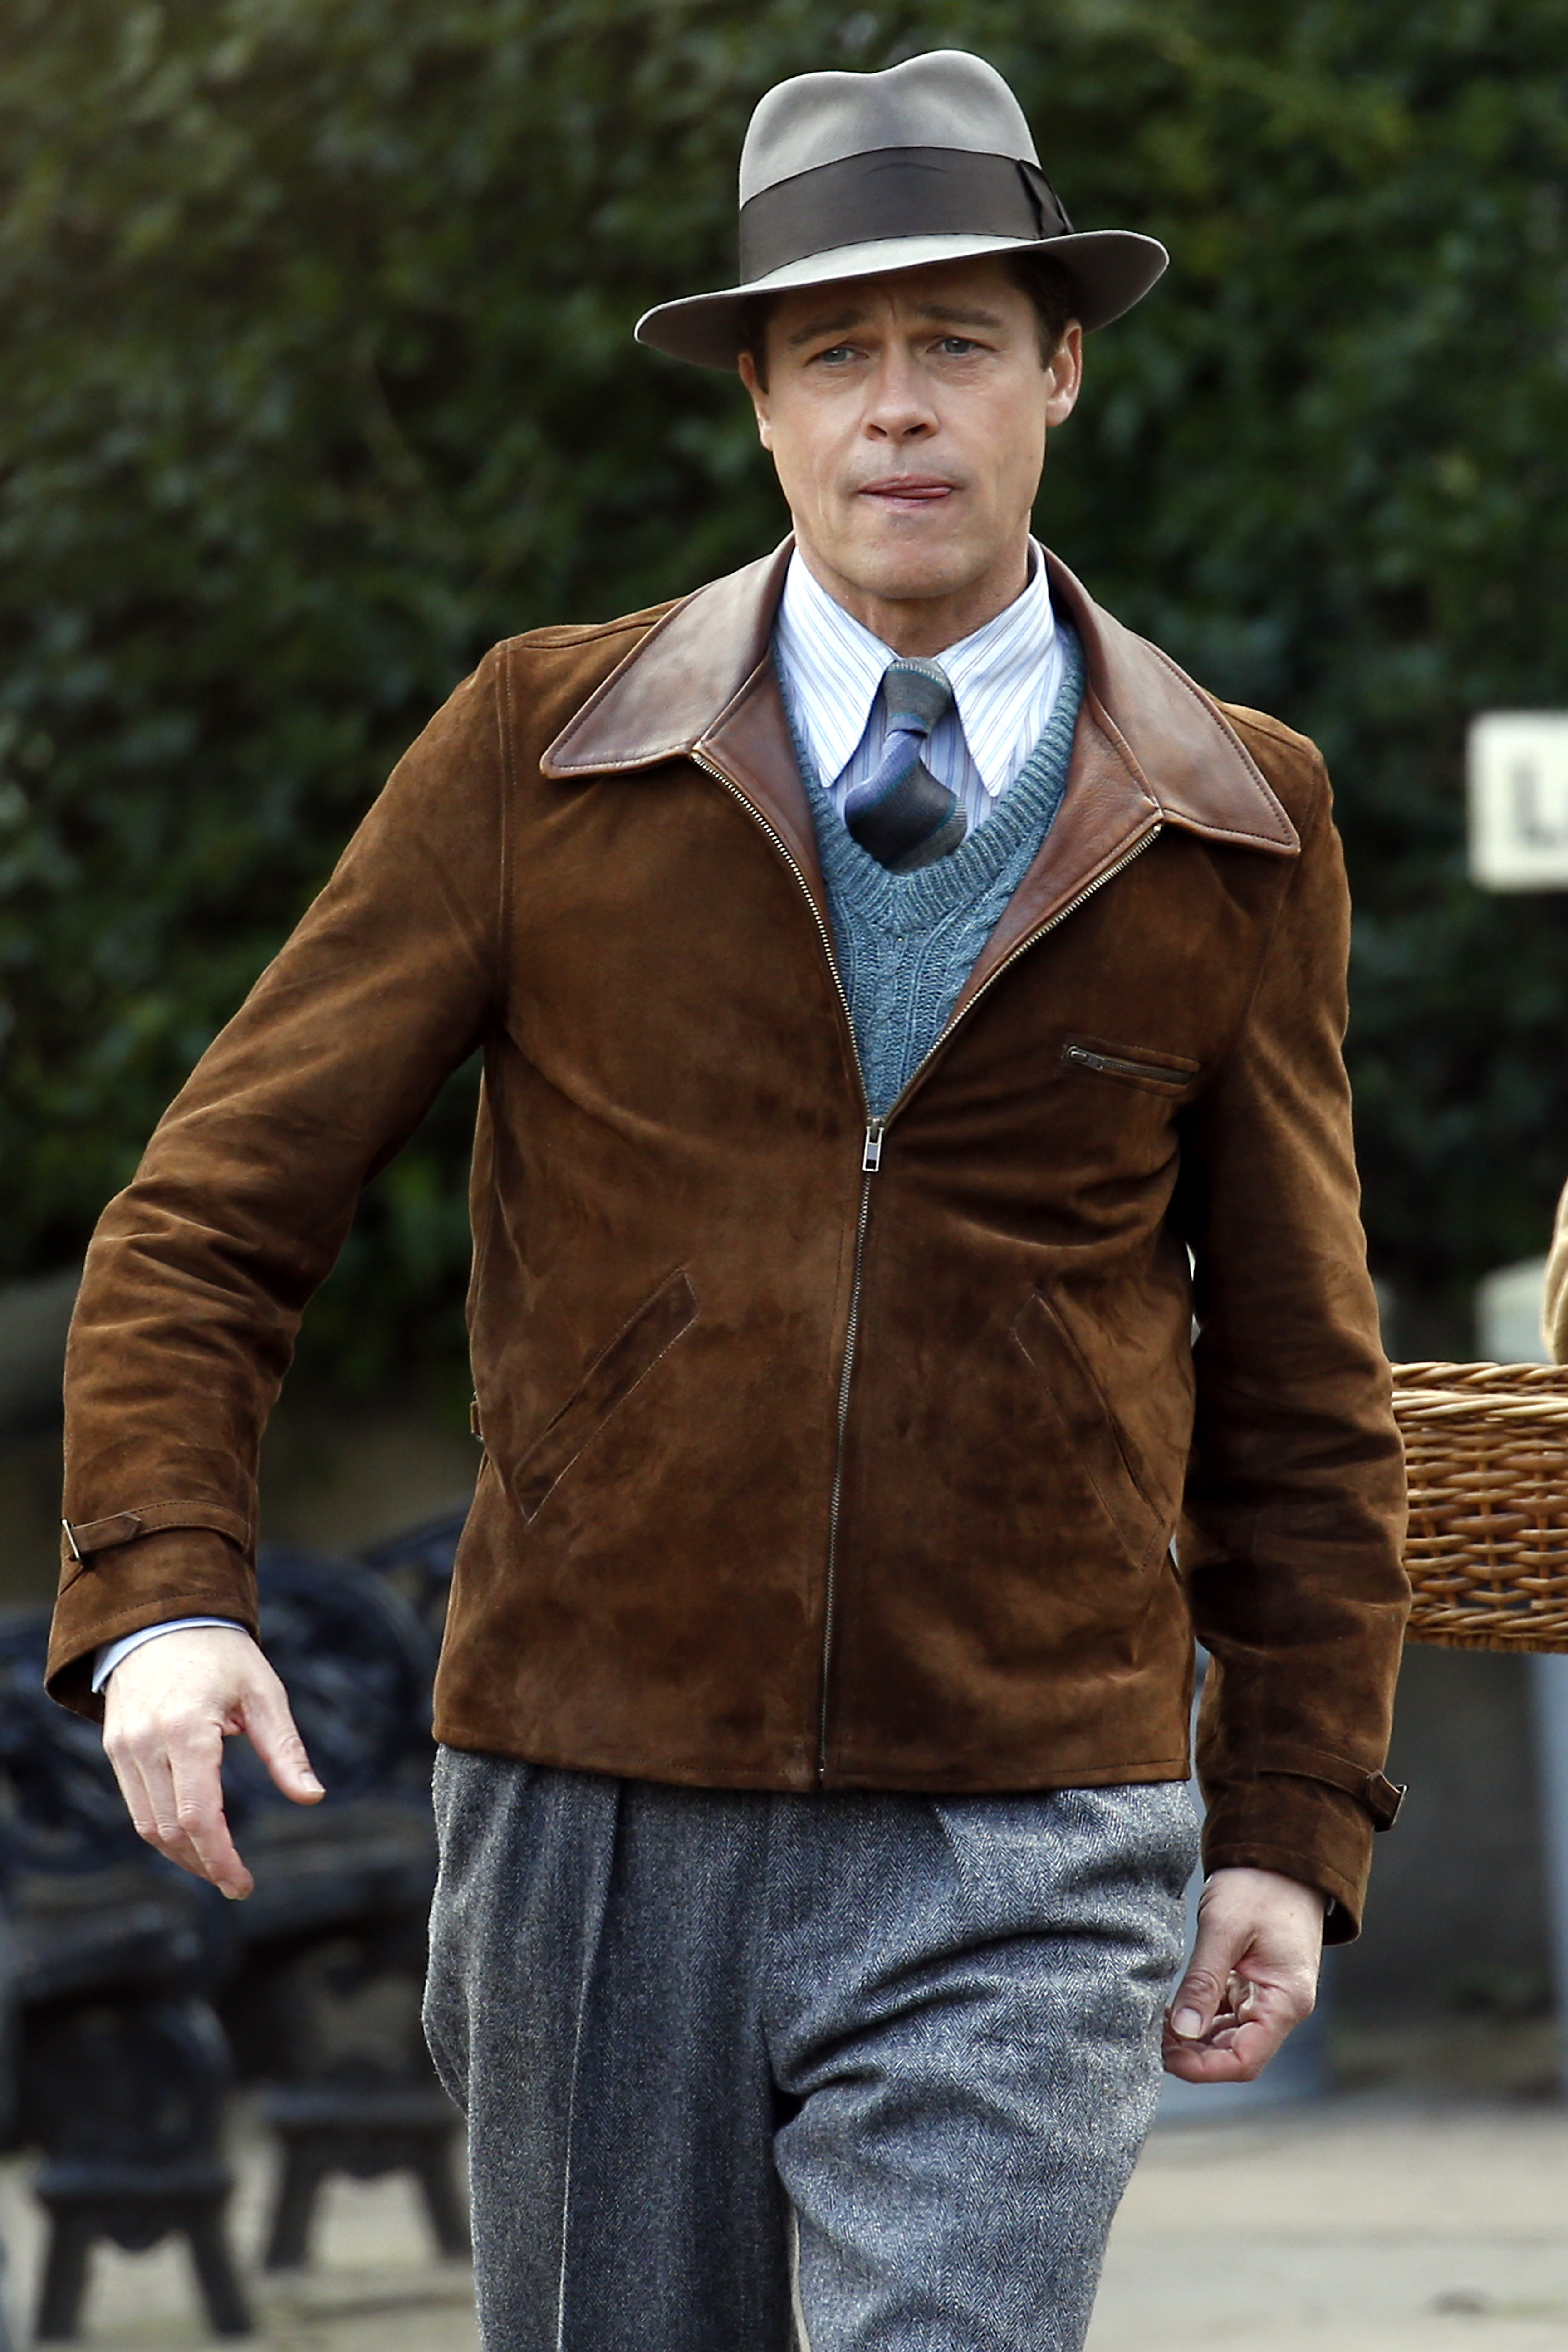 Brad Pitt's Brown Suede Jacket in Allied » BAMF Style